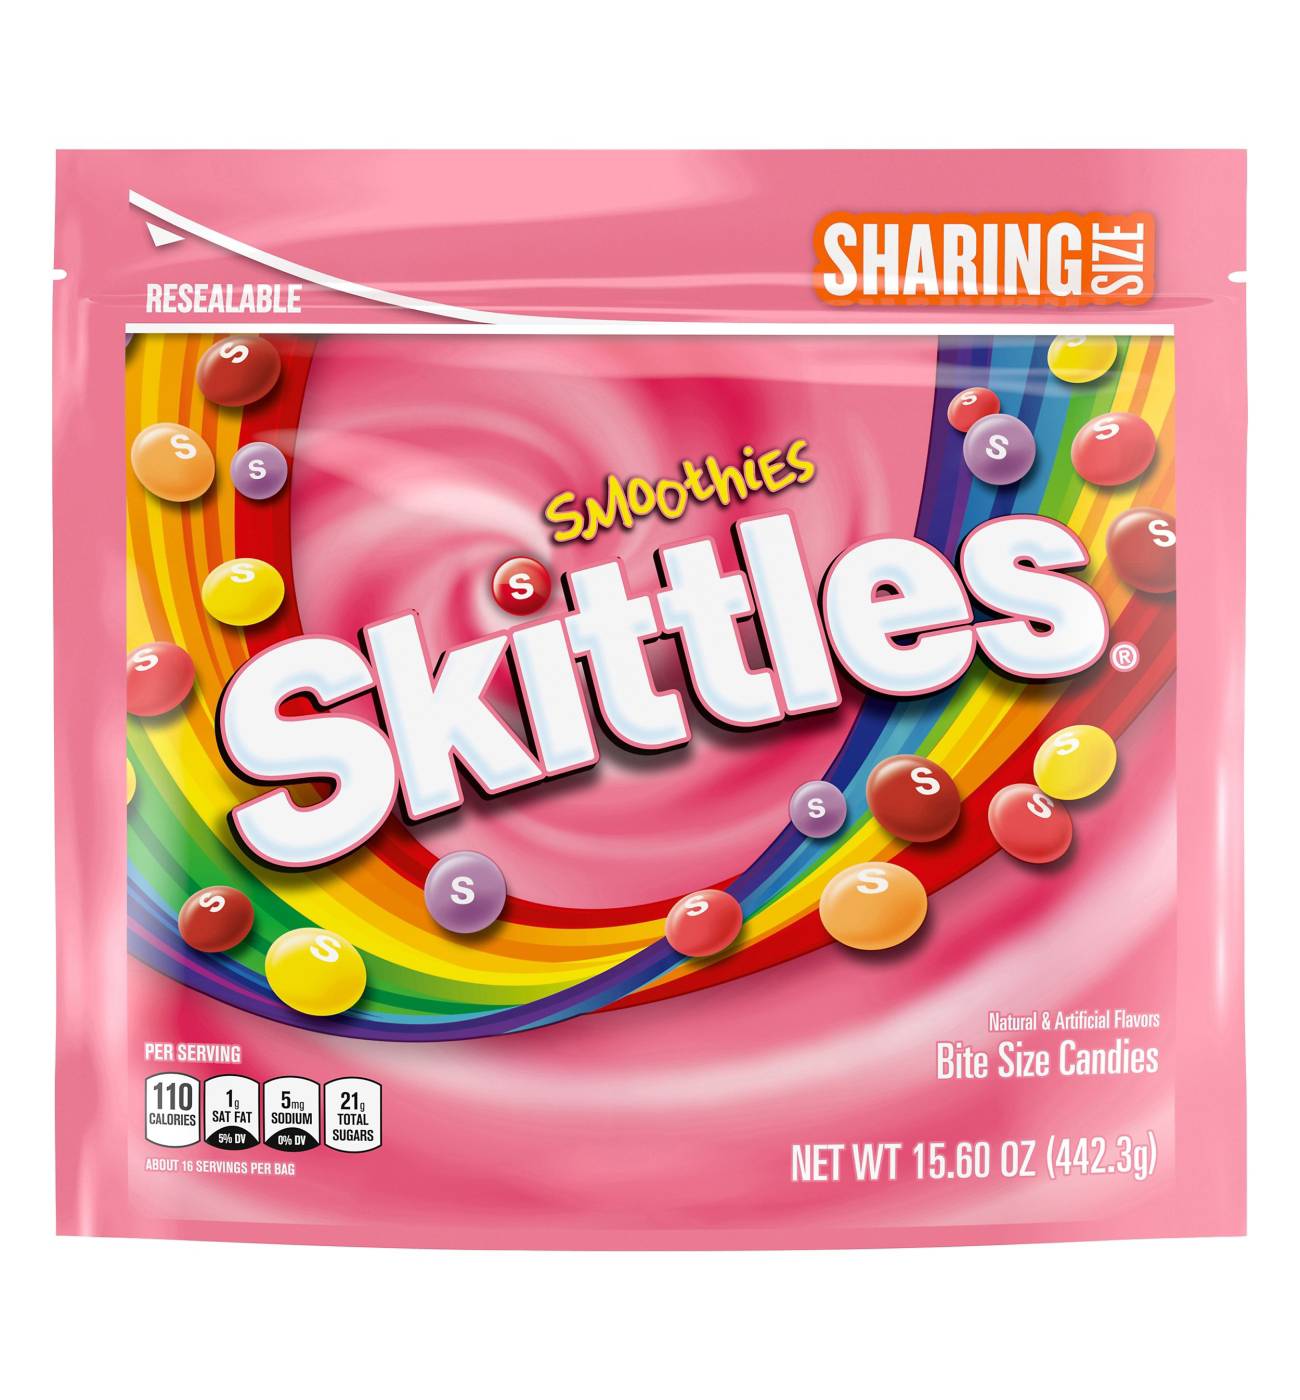 Skittles Smoothies Chewy Candy - Sharing Size; image 1 of 5